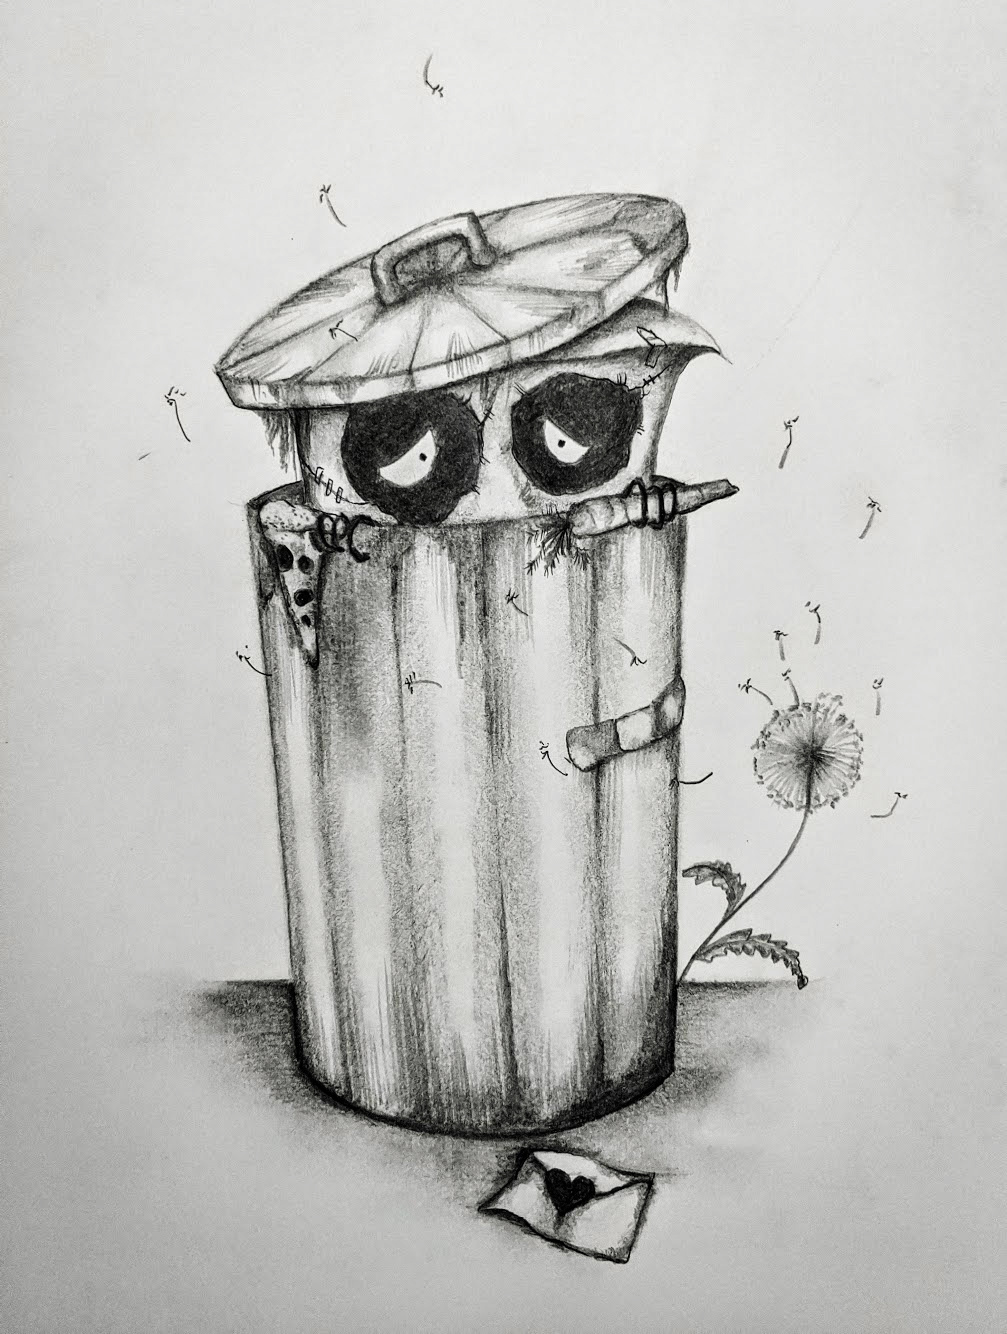 IMAGE: An anthropomorphic paper bag peeks out of a trash can. The bag holds a carrot in one hand and a slice of pizza in the other. A dandelion seedhead sprouts from the ground spraying seeds into the air. A letter sits on the ground, sealed with a valentine-shaped sticker.